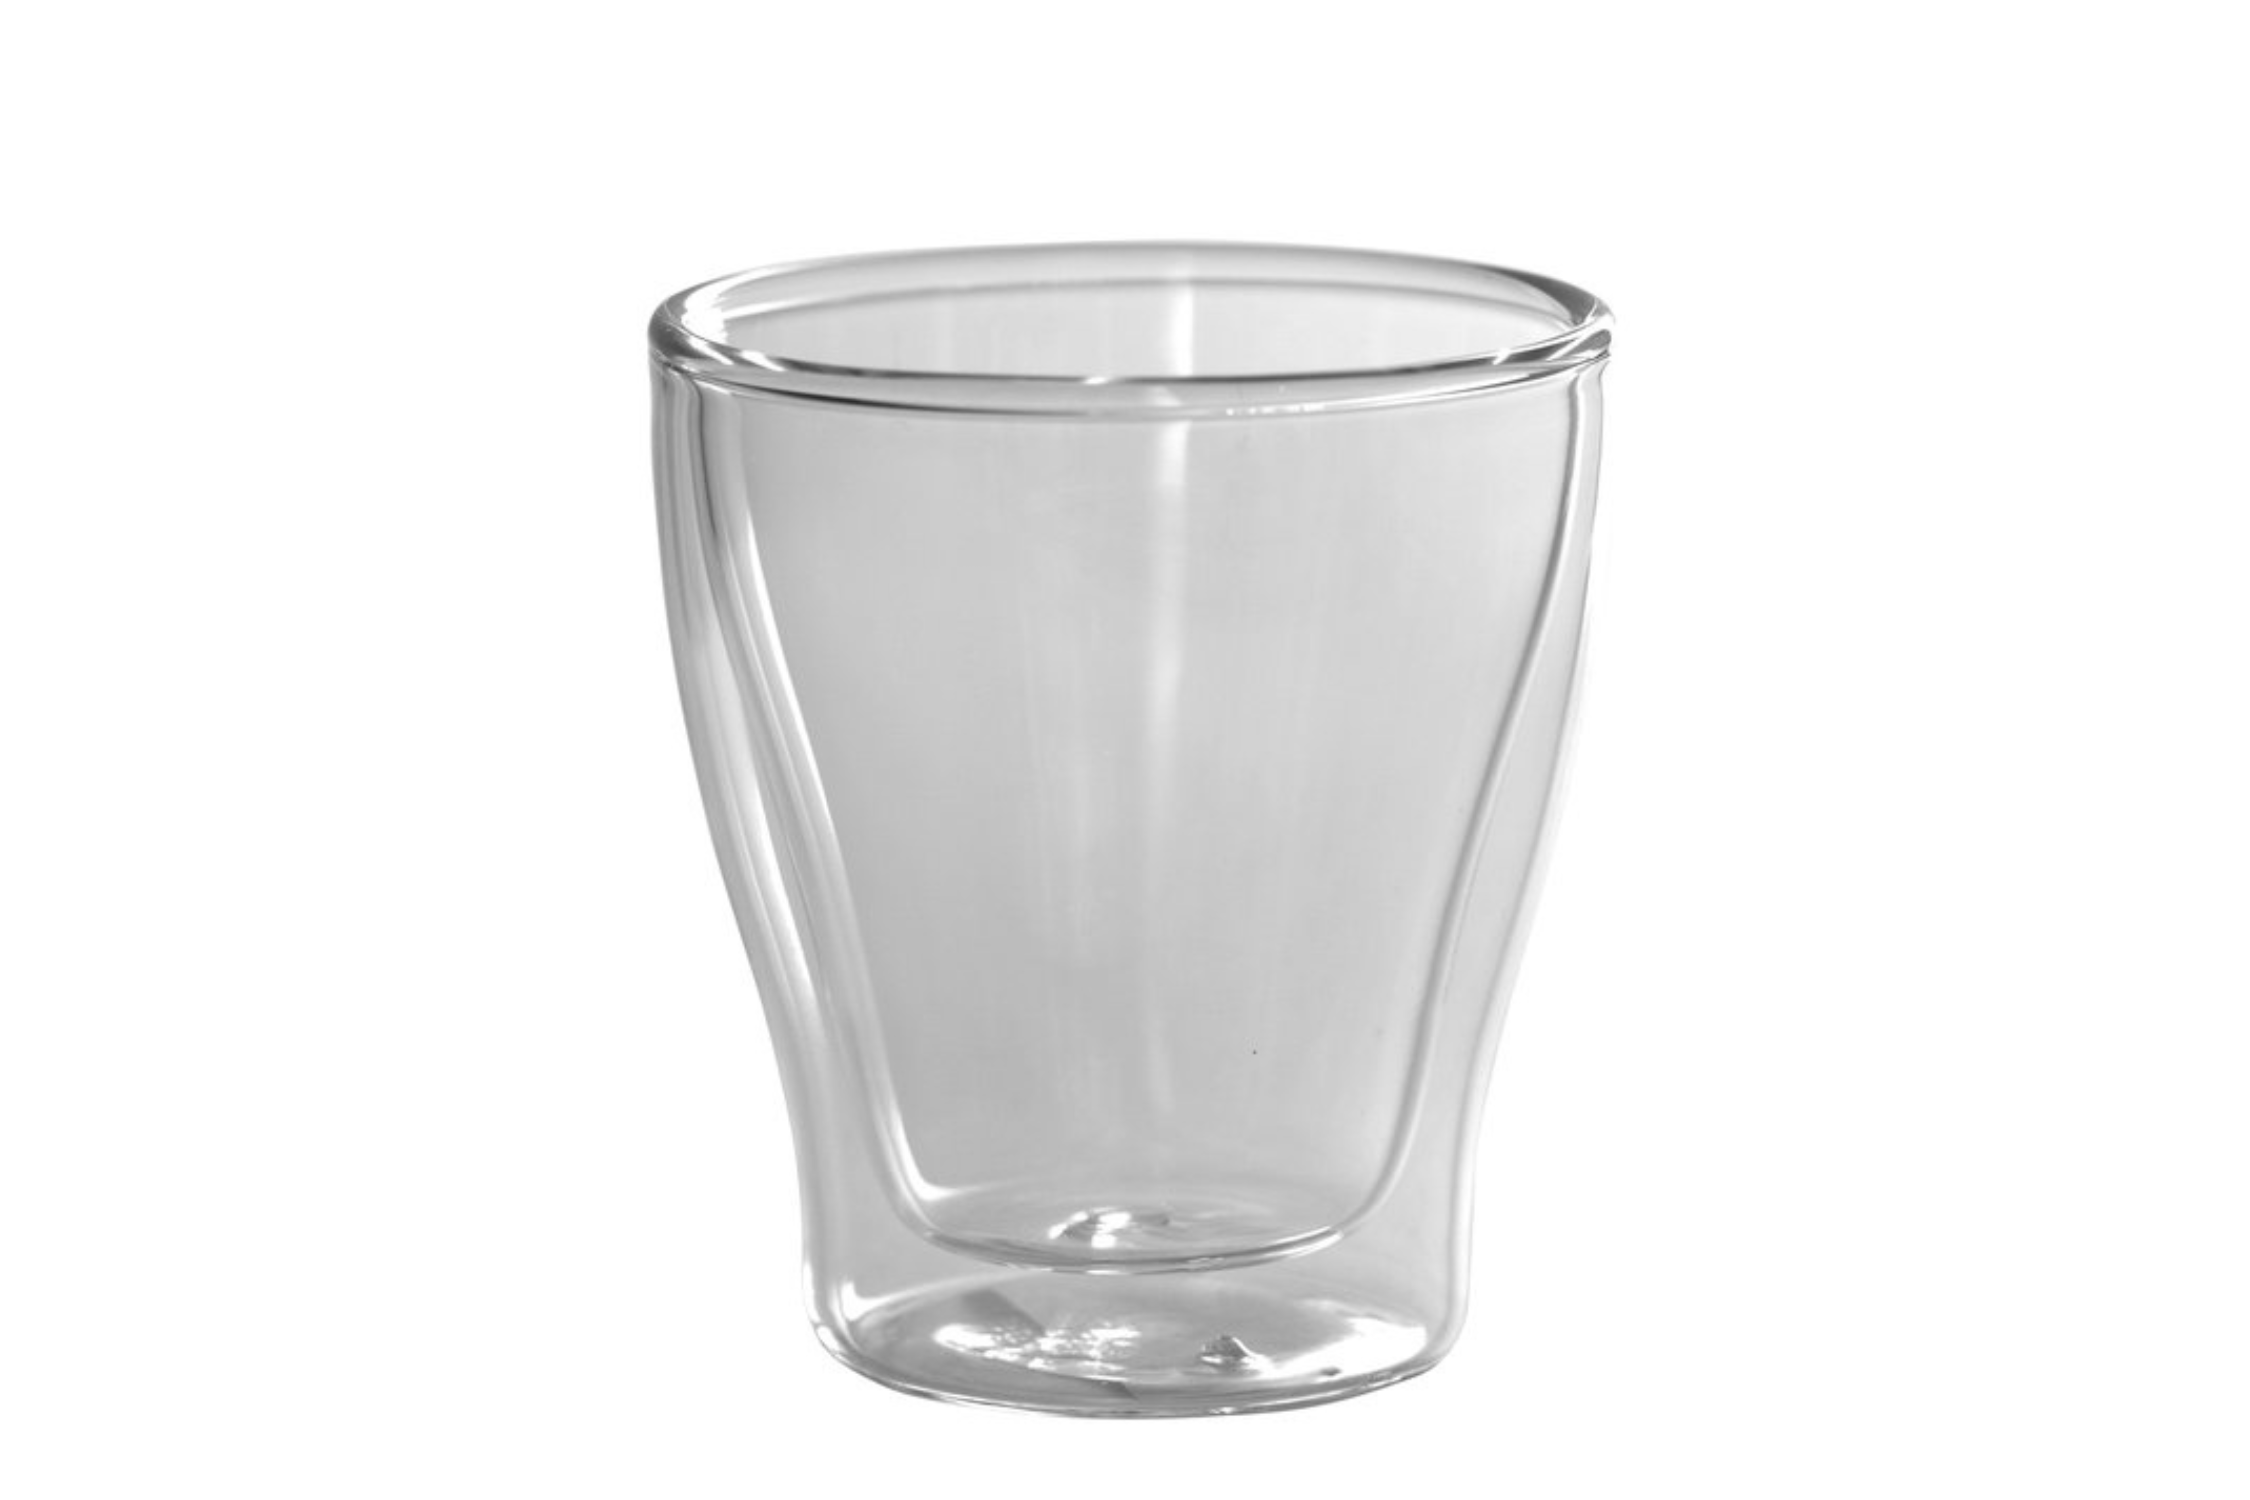  Serax Double Walled Glass set of 4 by Marcel Wolterinck